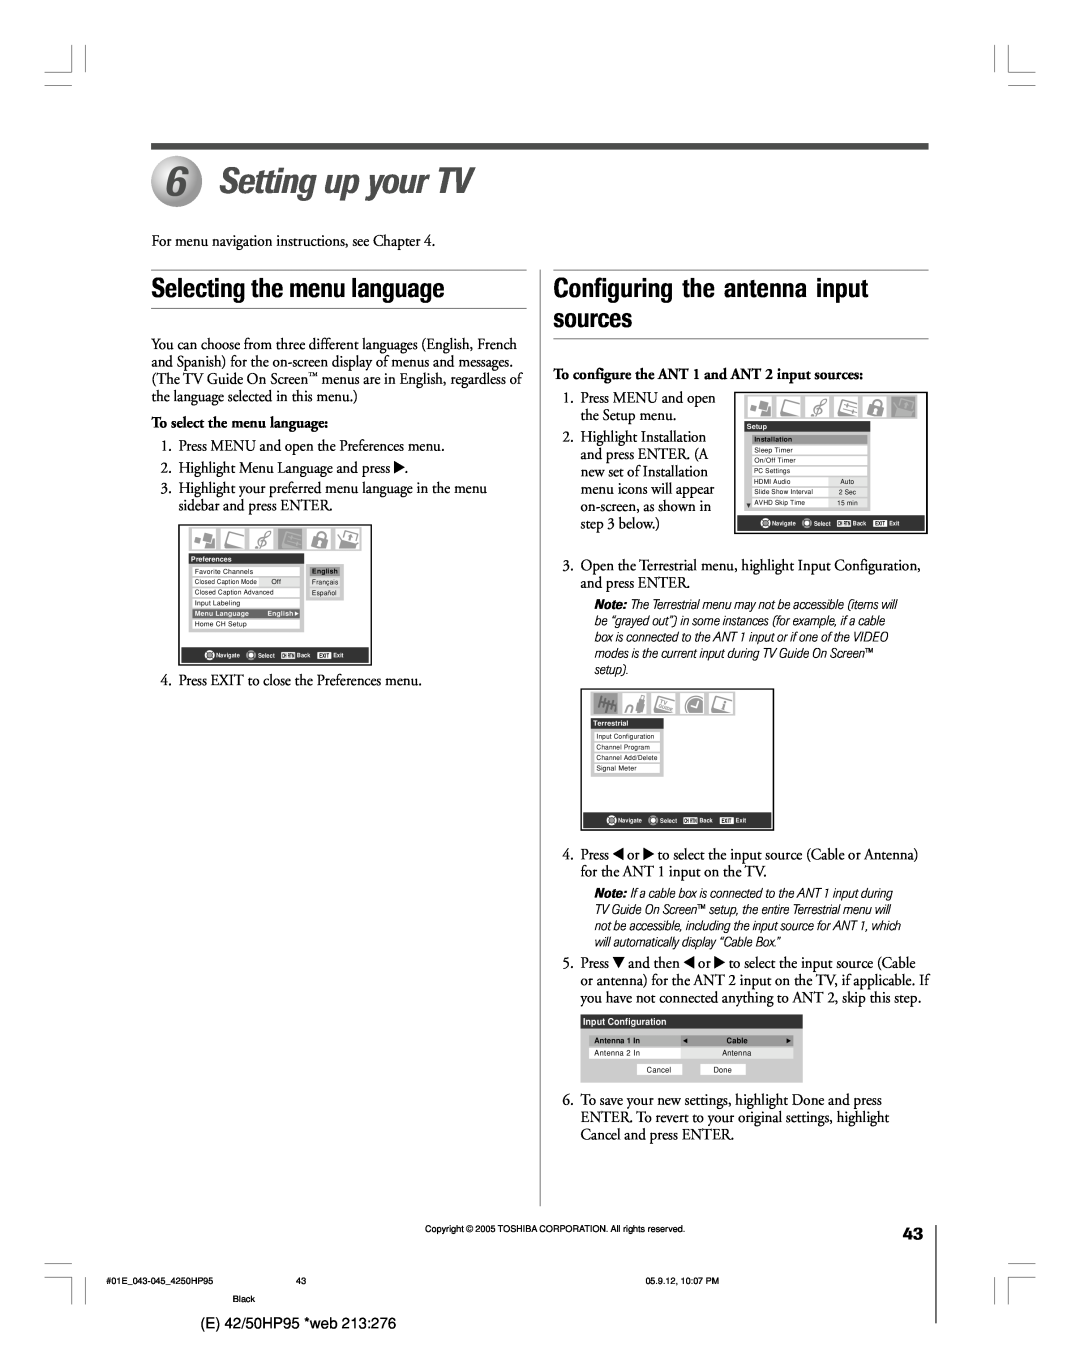 Toshiba 42HP95 owner manual Setting up your TV, Selecting the menu language, Configuring the antenna input, sources 